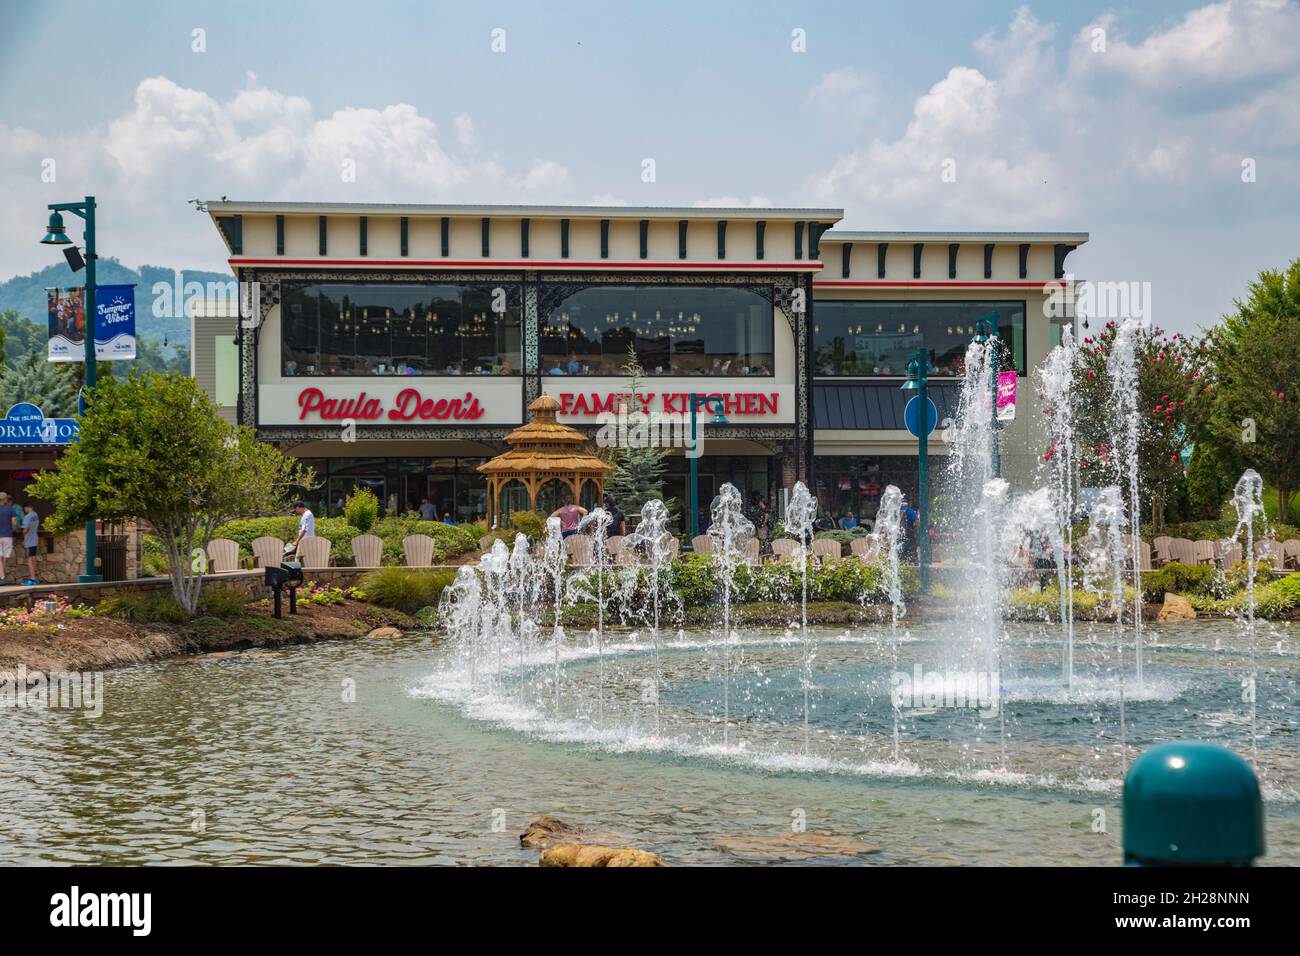 Water fountain in front of Paula Deen's Family Kitchen restaurant at The Island recreation area in Pigeon Forge, Tennessee Stock Photo